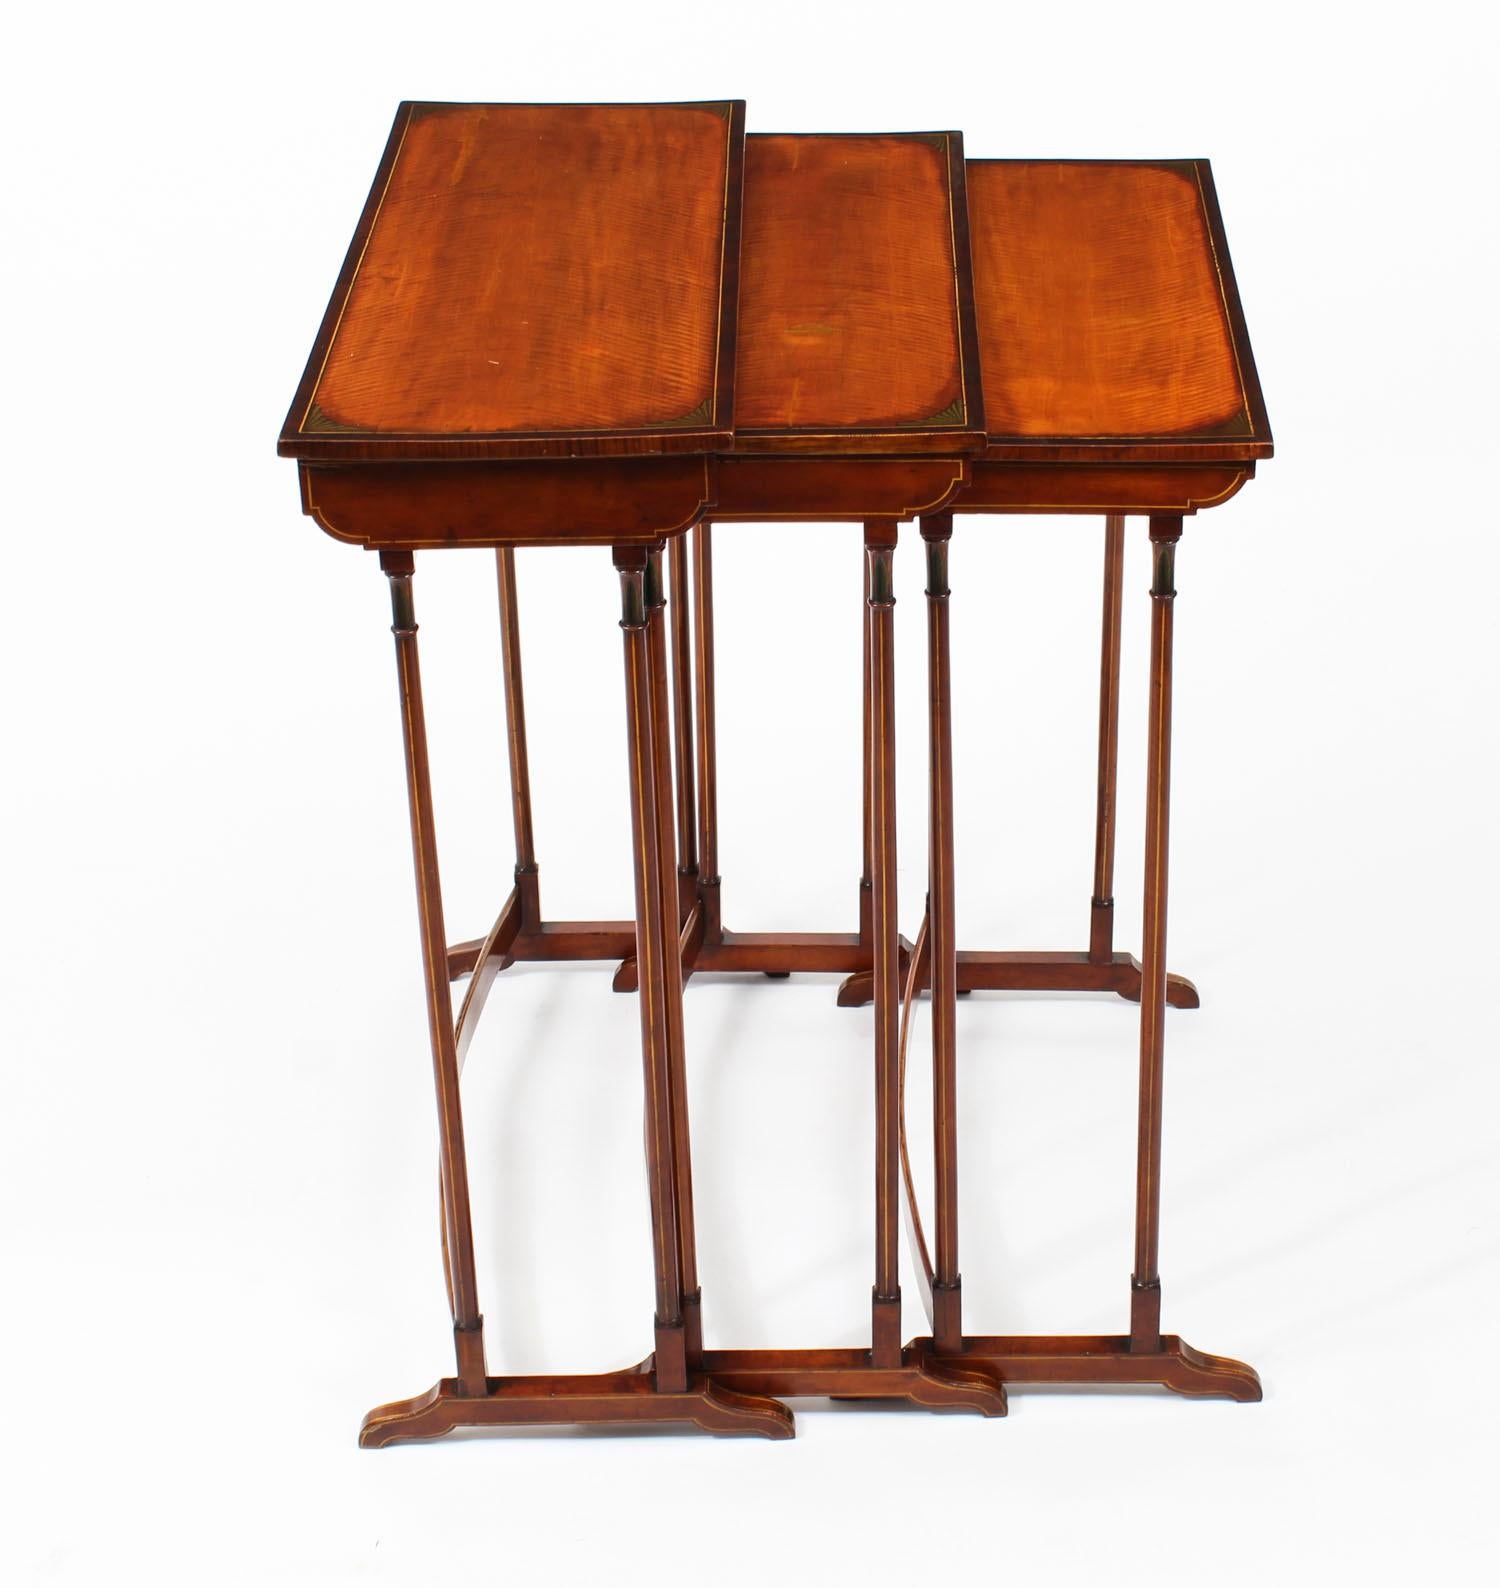 English Antique Victorian Satinwood and Inlaid Nest of 3 Tables, 19th Century